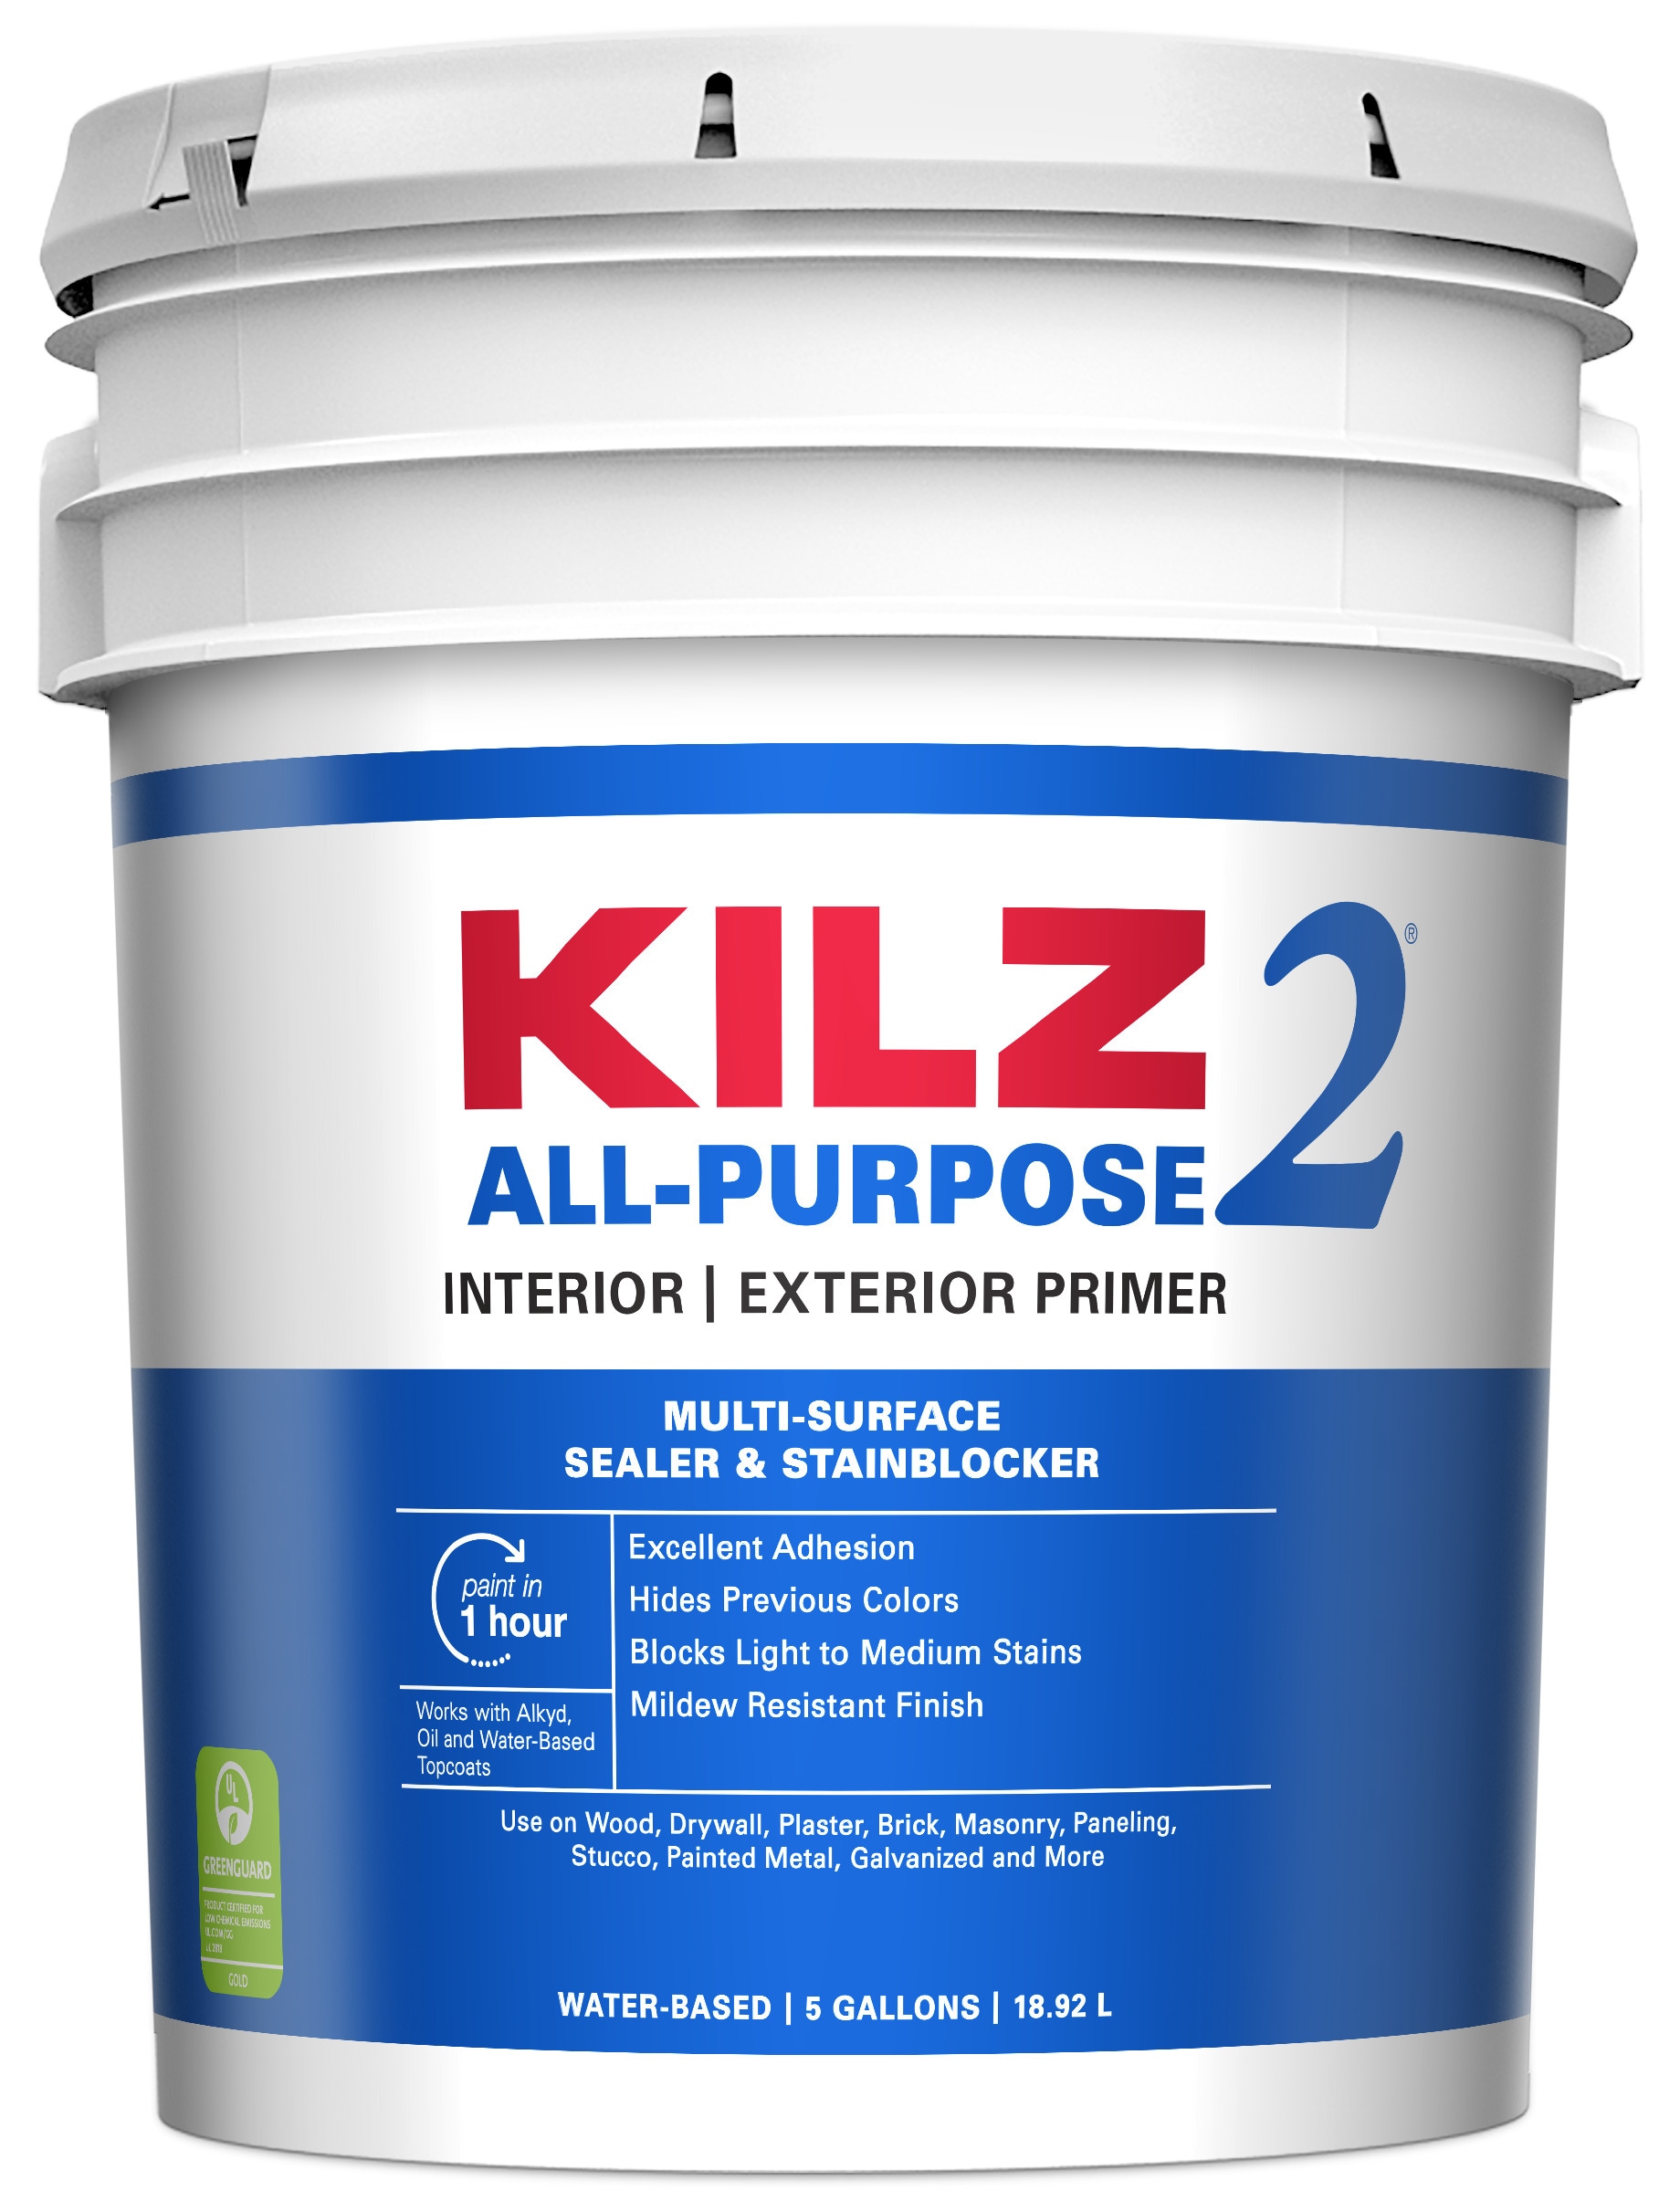 HGTV Home by Sherwin-Williams Power Interior/Exterior Multi-Purpose Water-Based Wall and Ceiling Primer (1-Gallon) | HP5474395-16